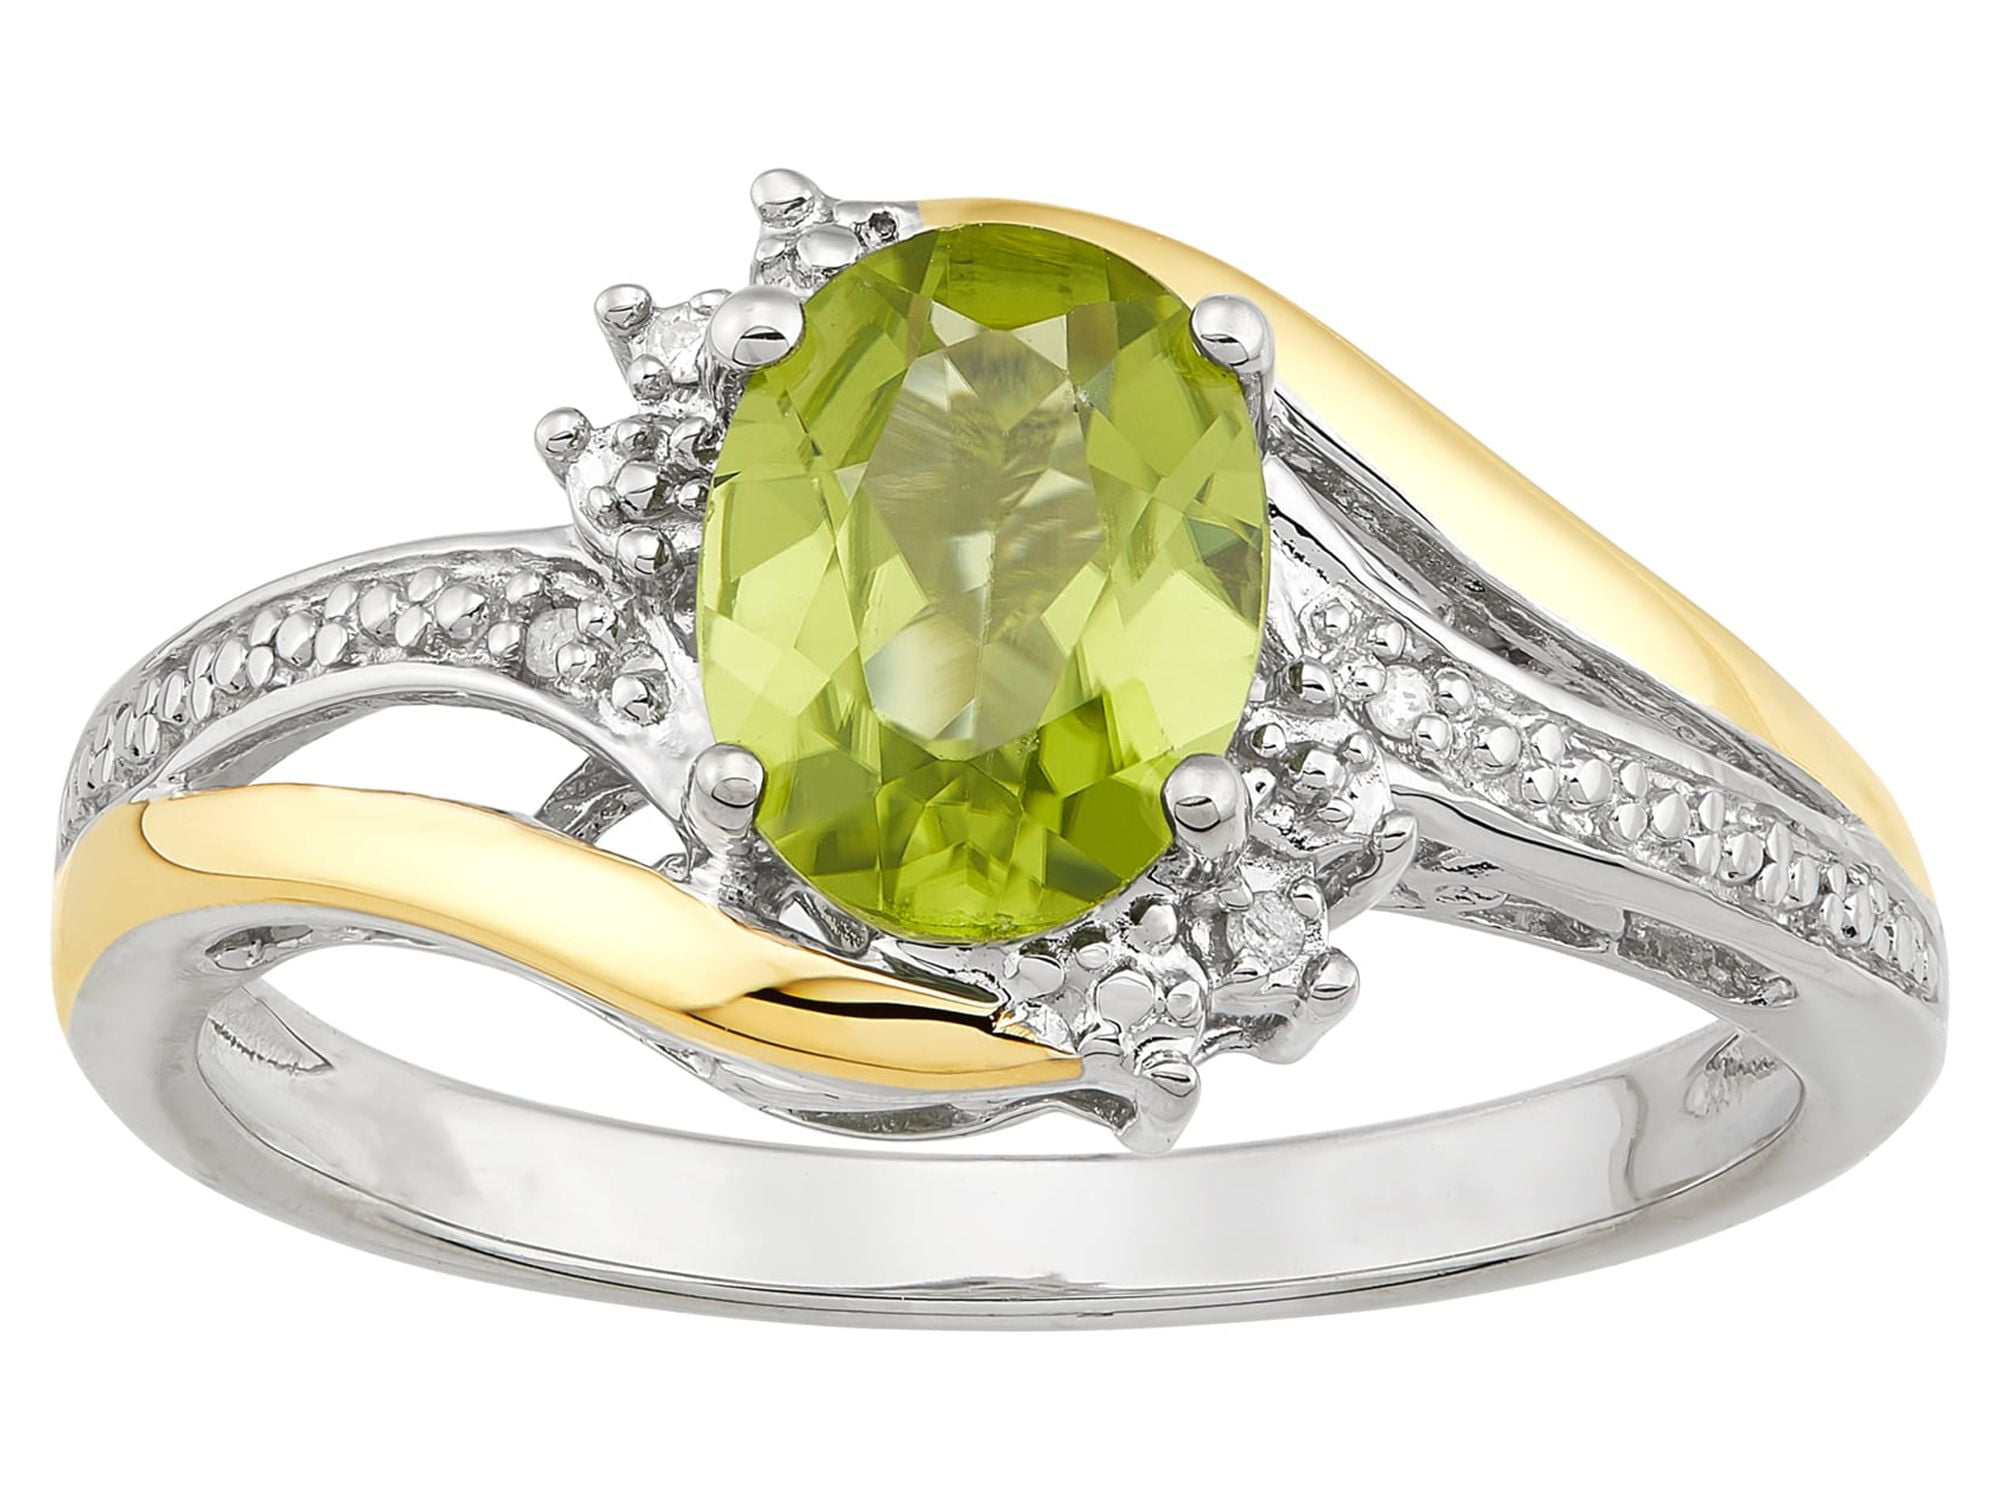 JewelersClub Peridot Ring Birthstone Jewelry – 0.75 Carat Peridot 14K Gold  Plated Silver Ring Jewelry with White Diamond Accent – Gemstone Rings with  Hypoallergenic 14K Gold Plated Silver Band - Walmart.com